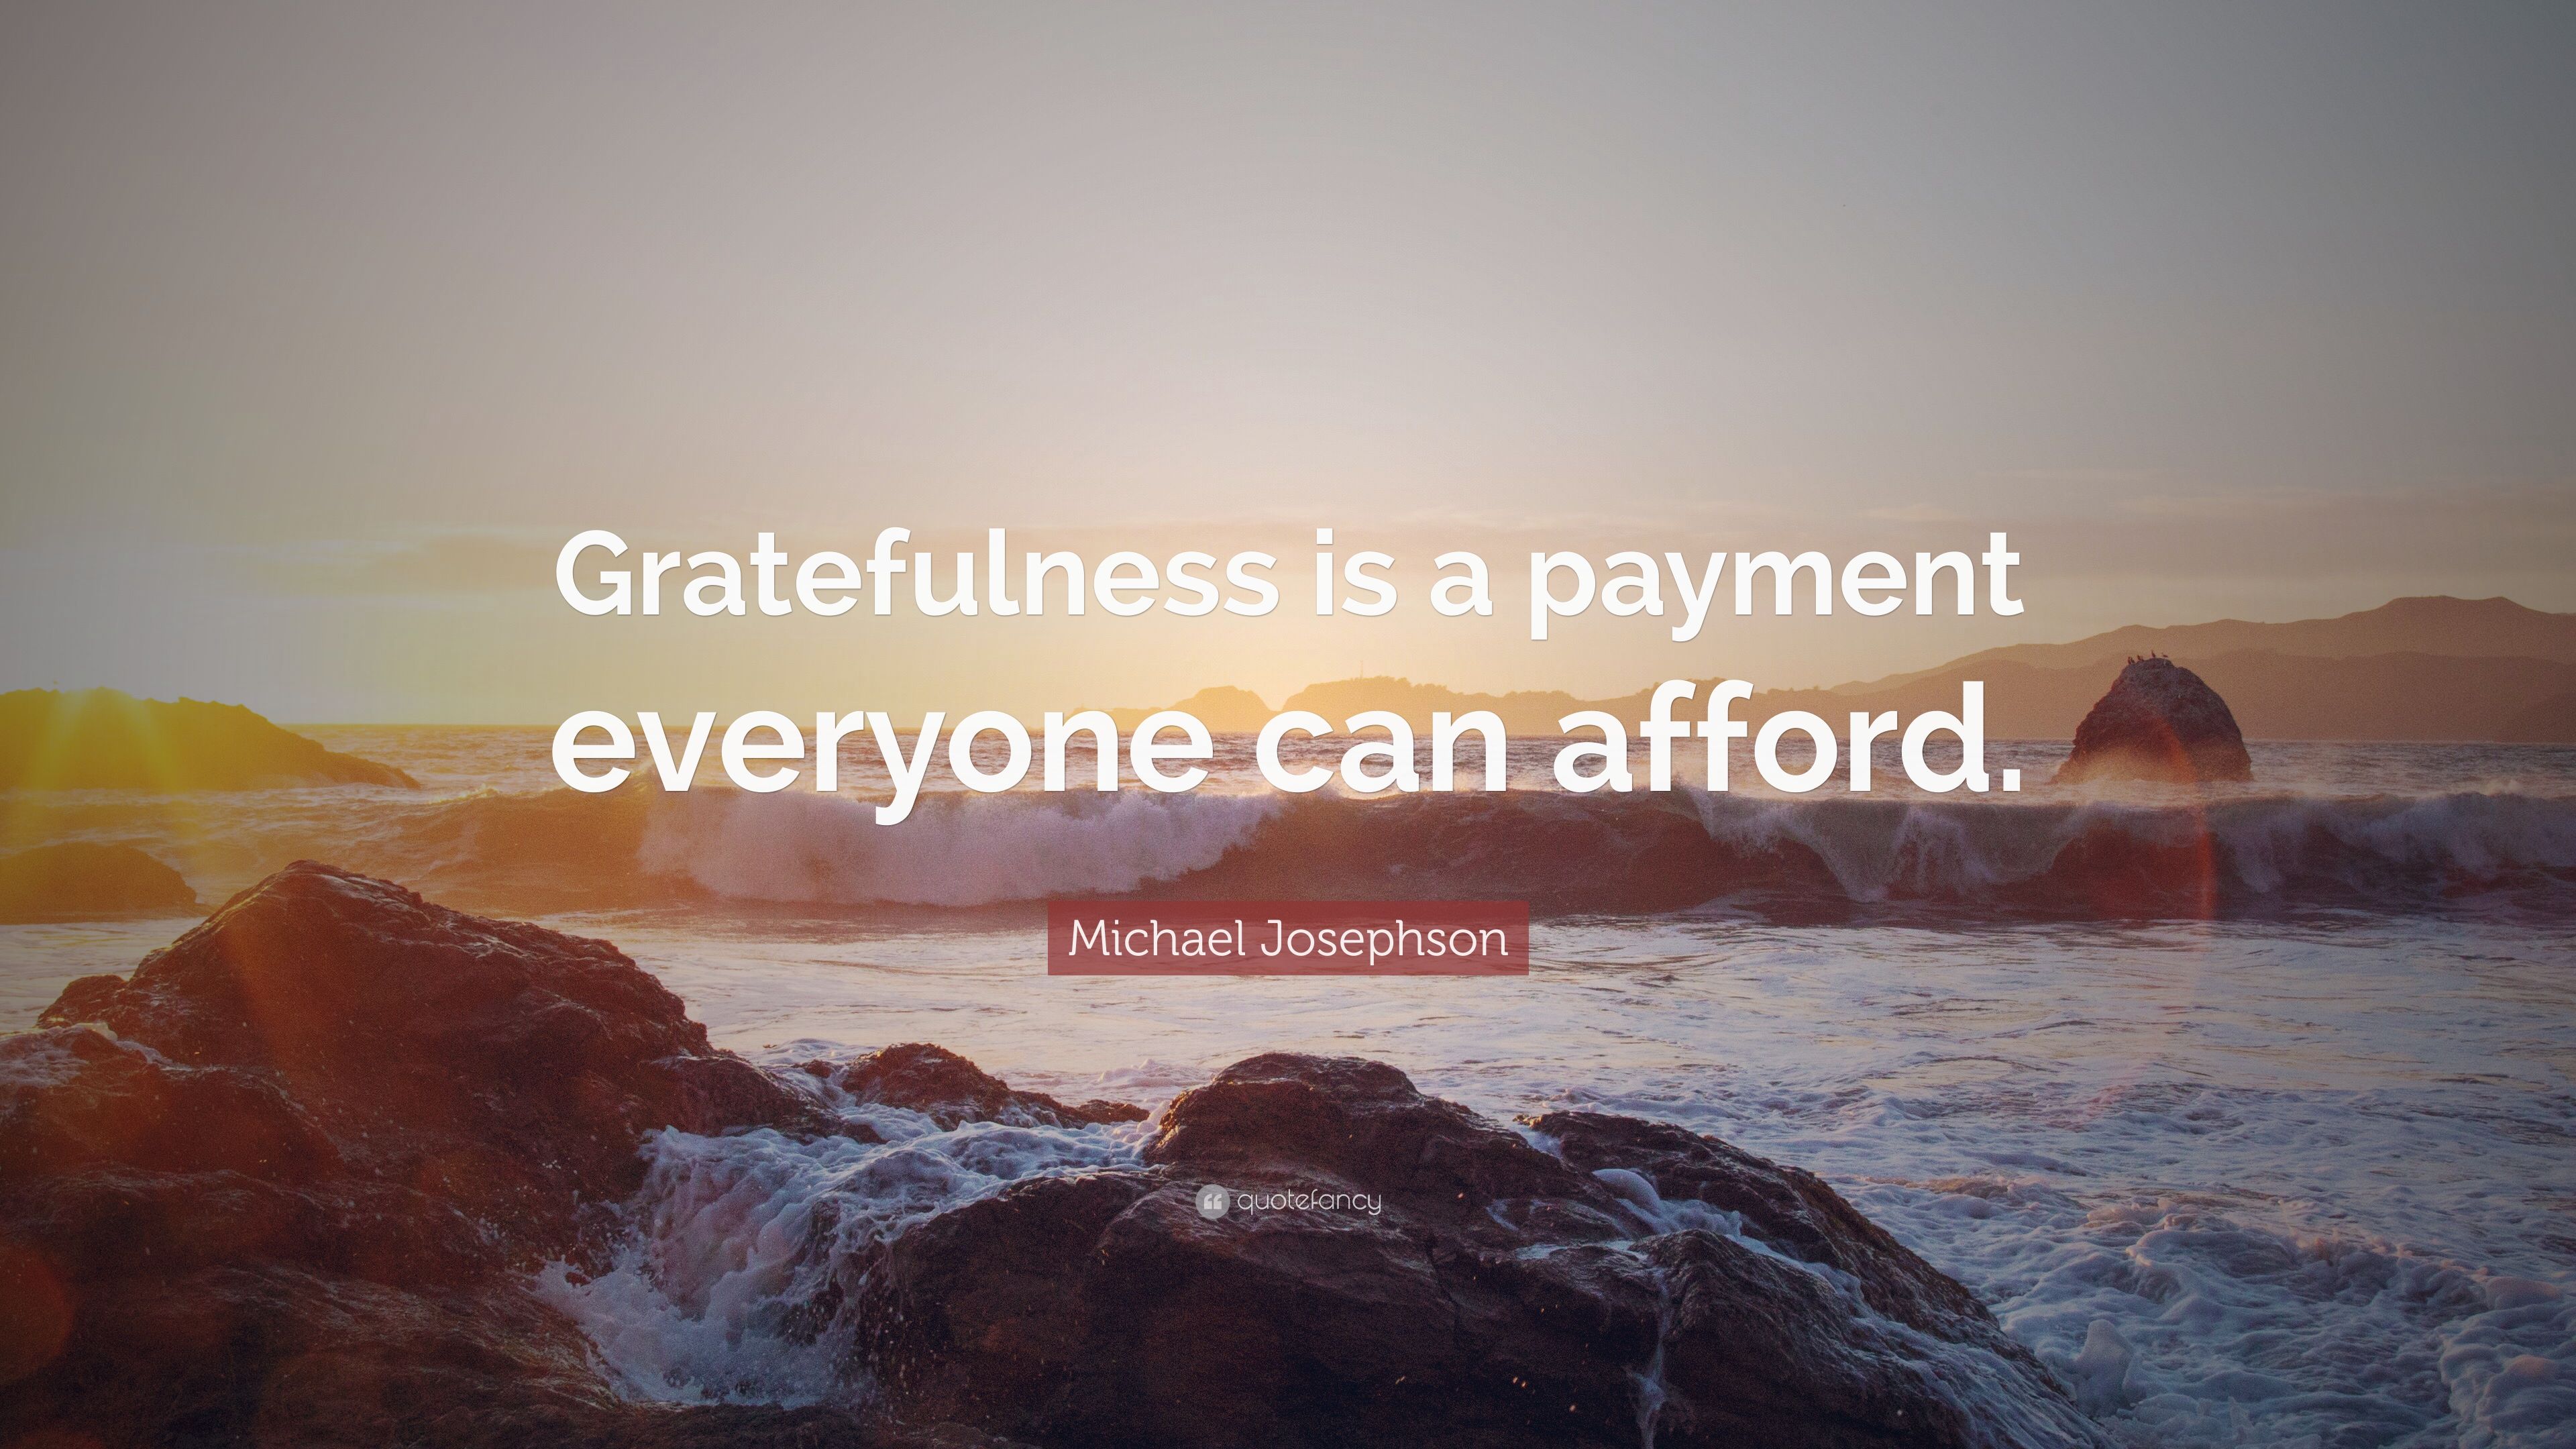 Michael Josephson Quote: “Gratefulness is a payment everyone can